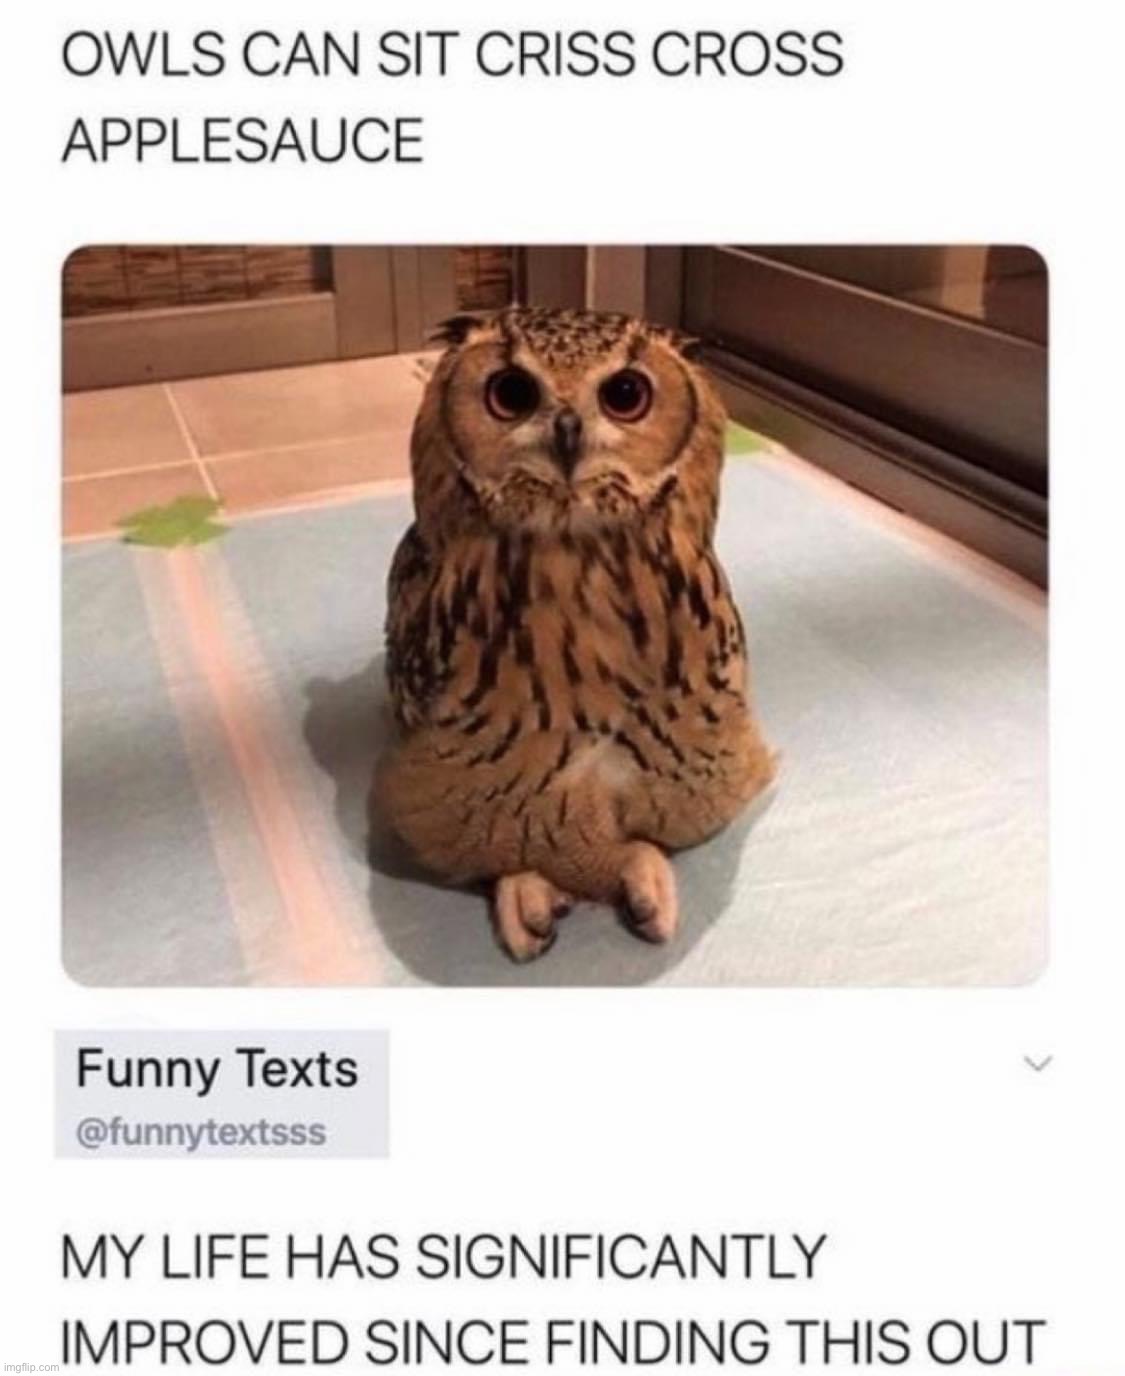 Wholesome unsee content | image tagged in owls can sit criss cross applesauce | made w/ Imgflip meme maker